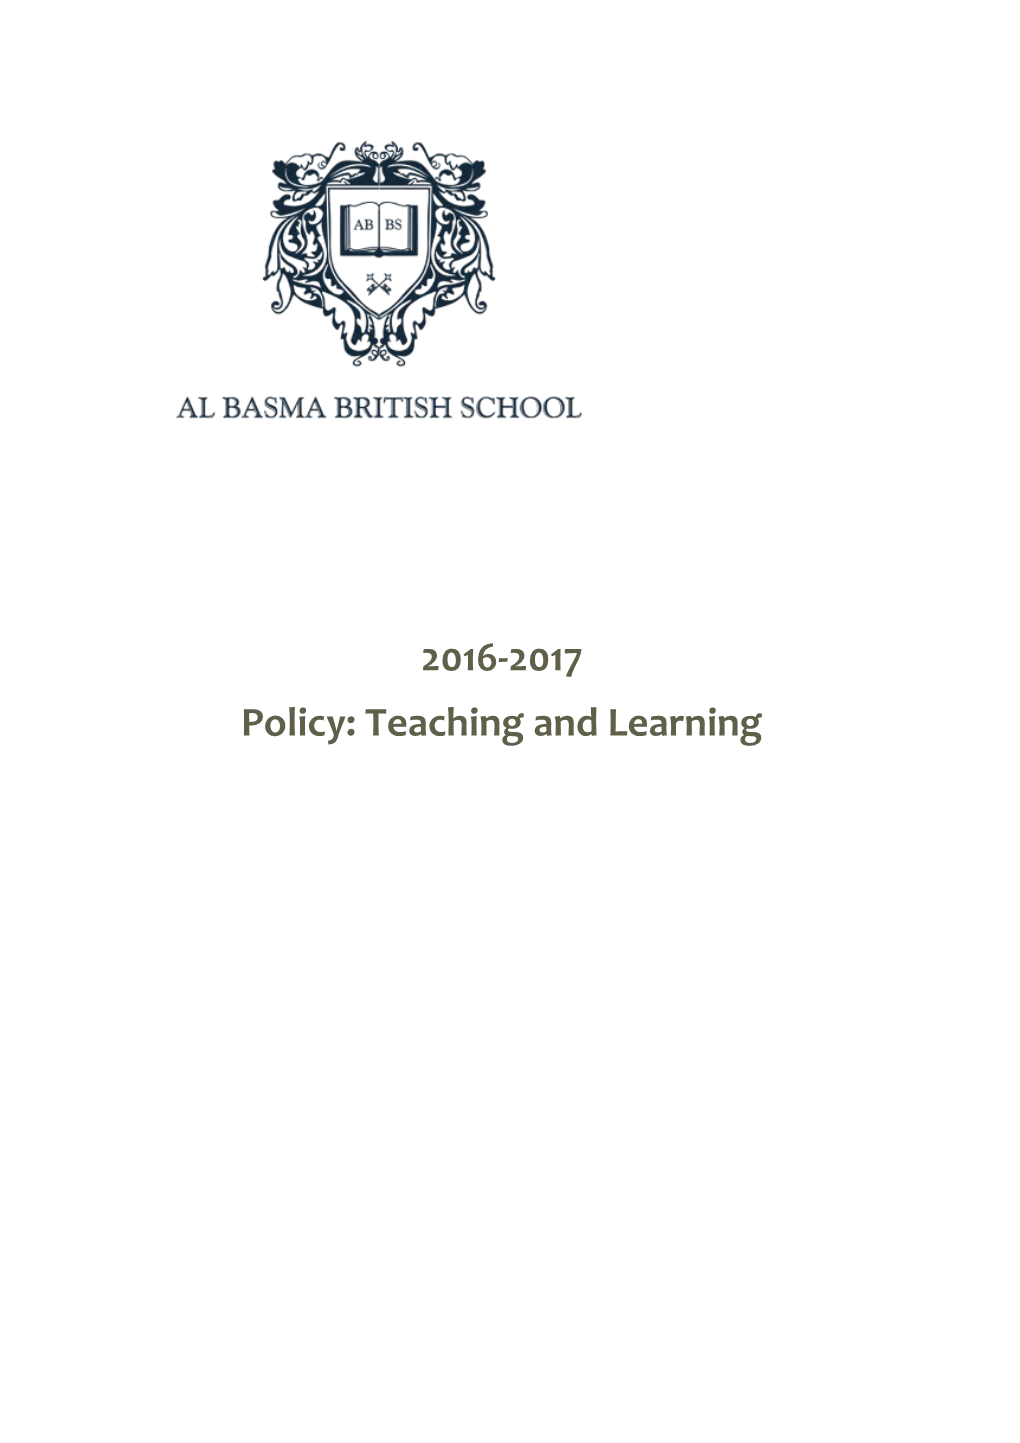 Policy: Teaching and Learning